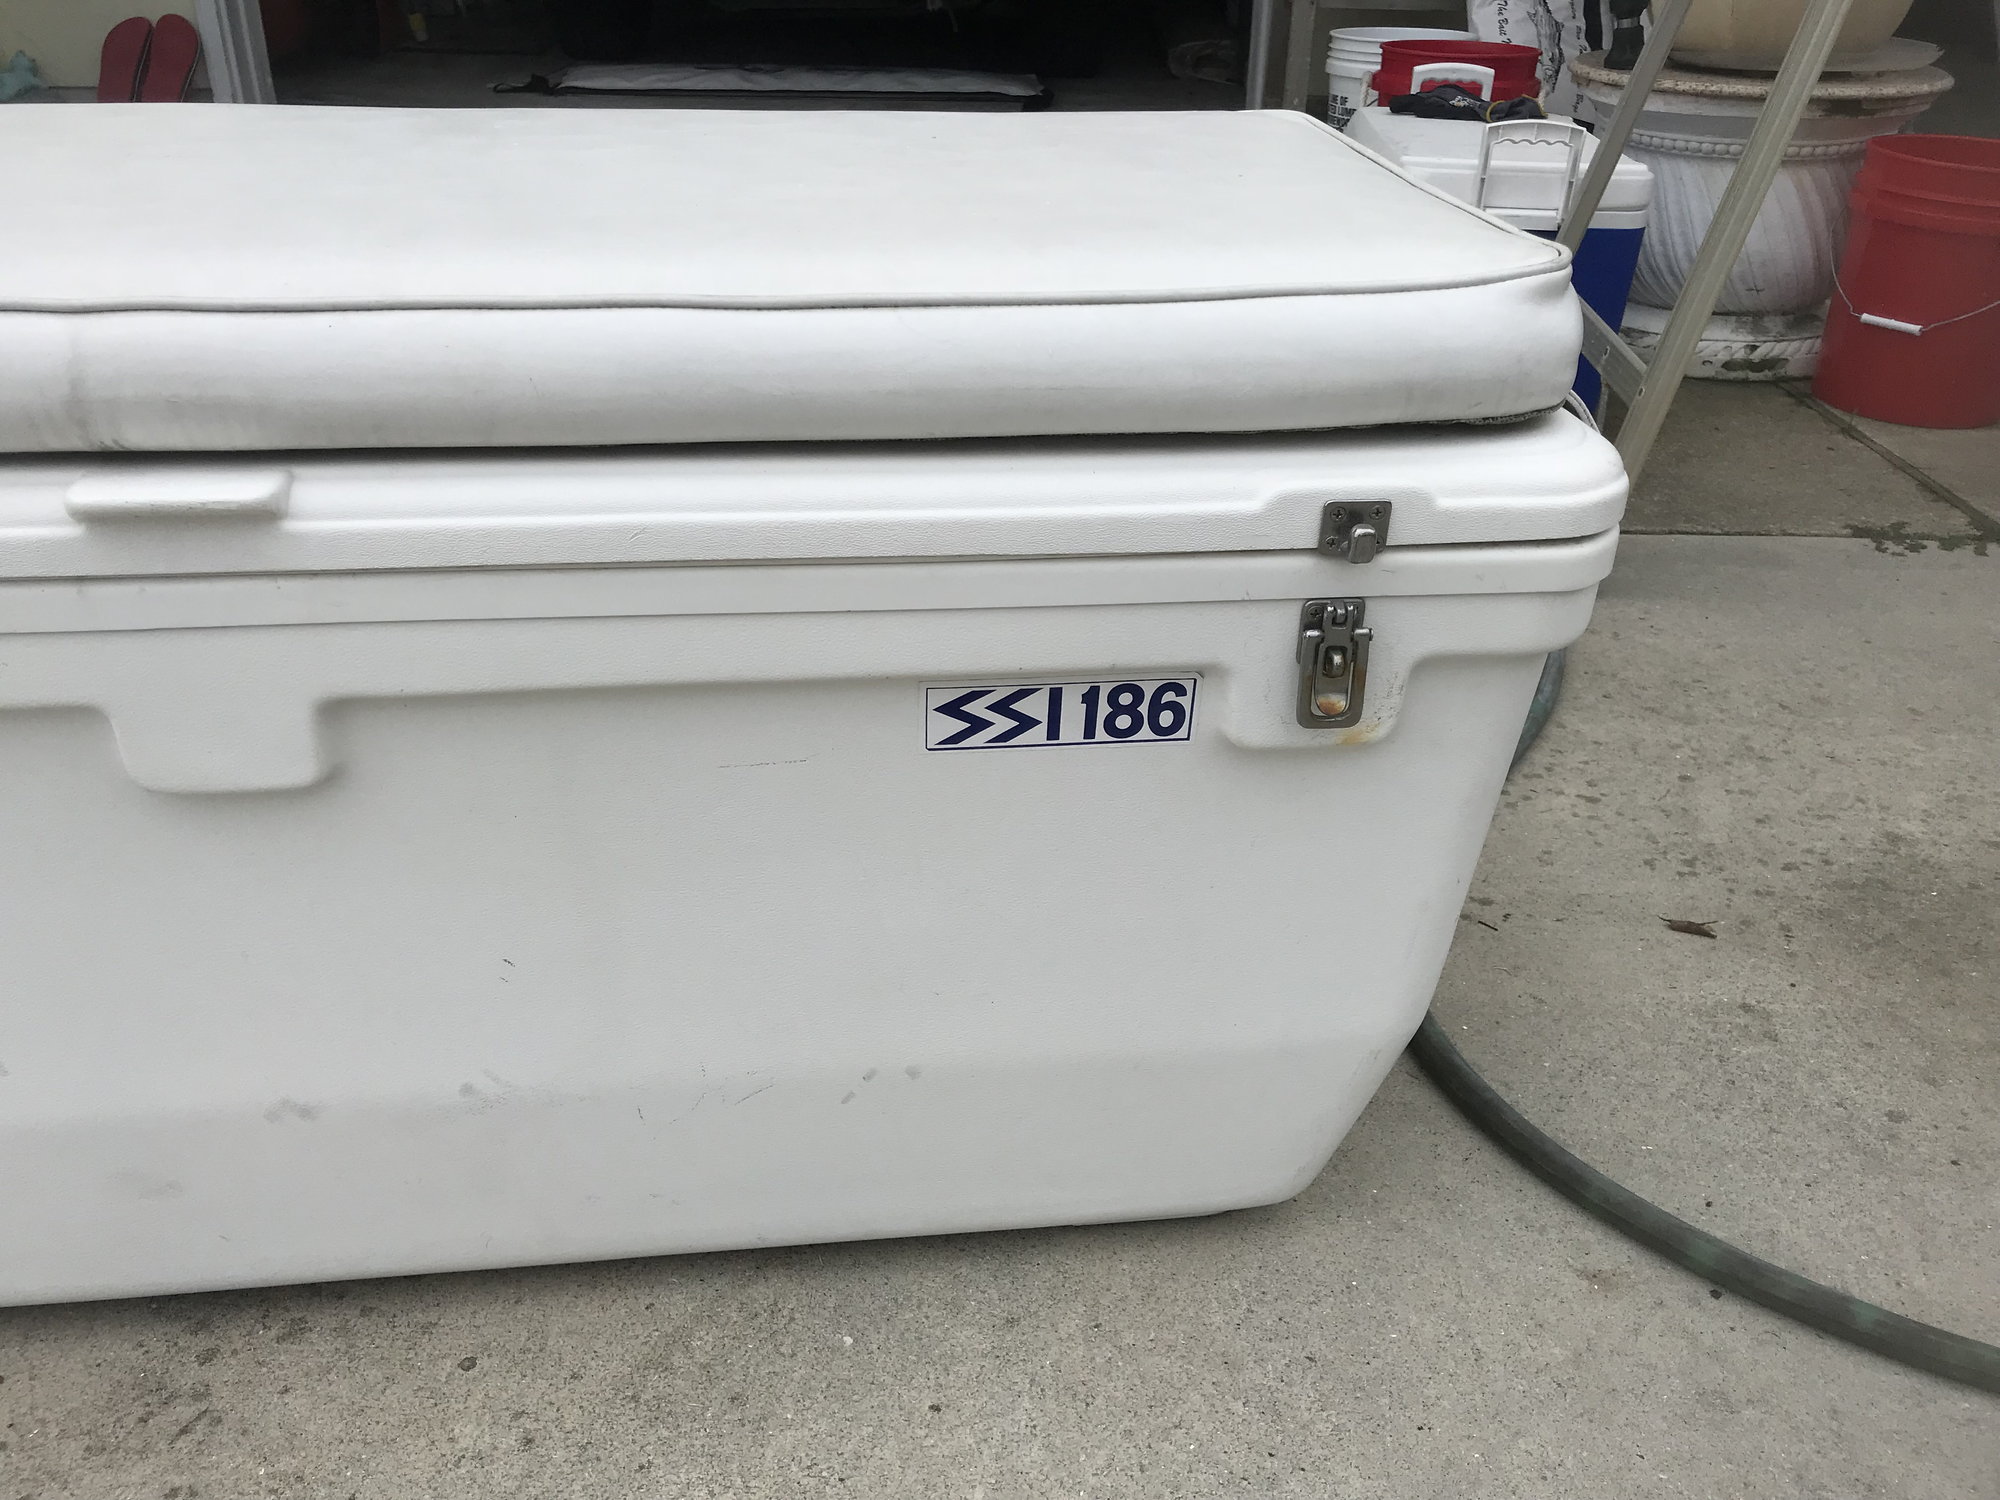 Great way to make block ice for cooler - The Hull Truth - Boating and  Fishing Forum